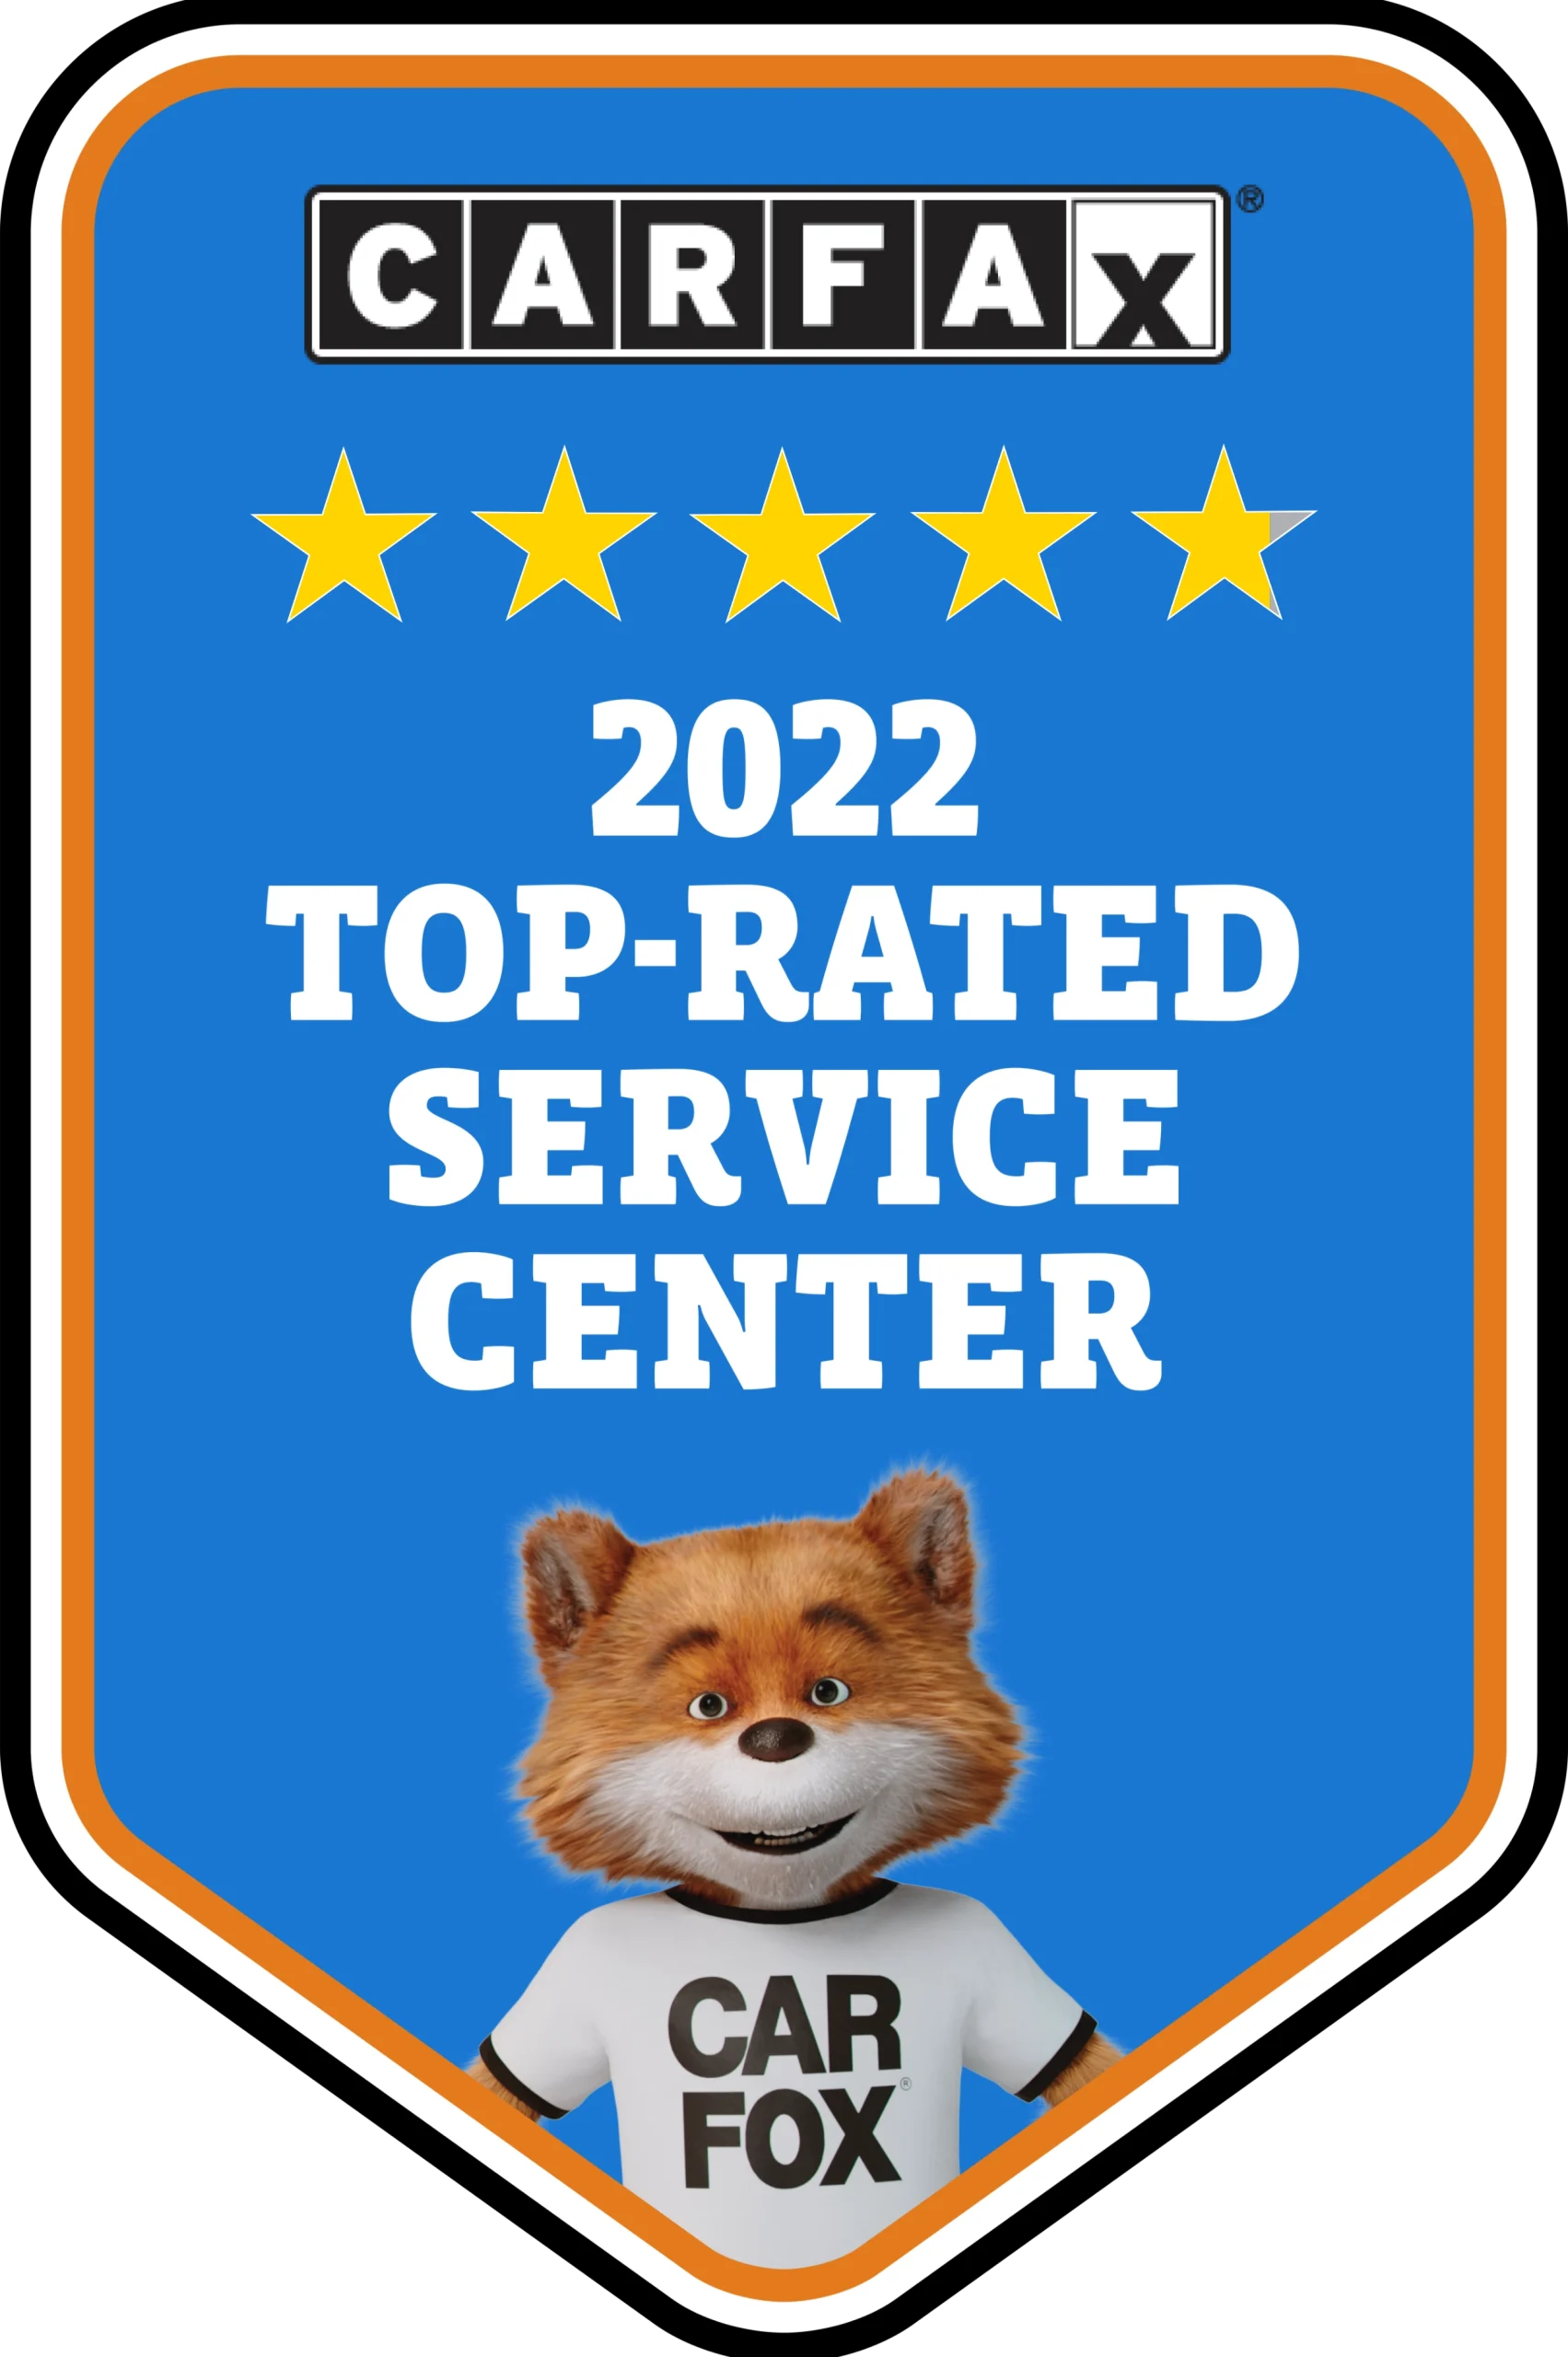 CARFAX 2022 Top-Rated Service Center